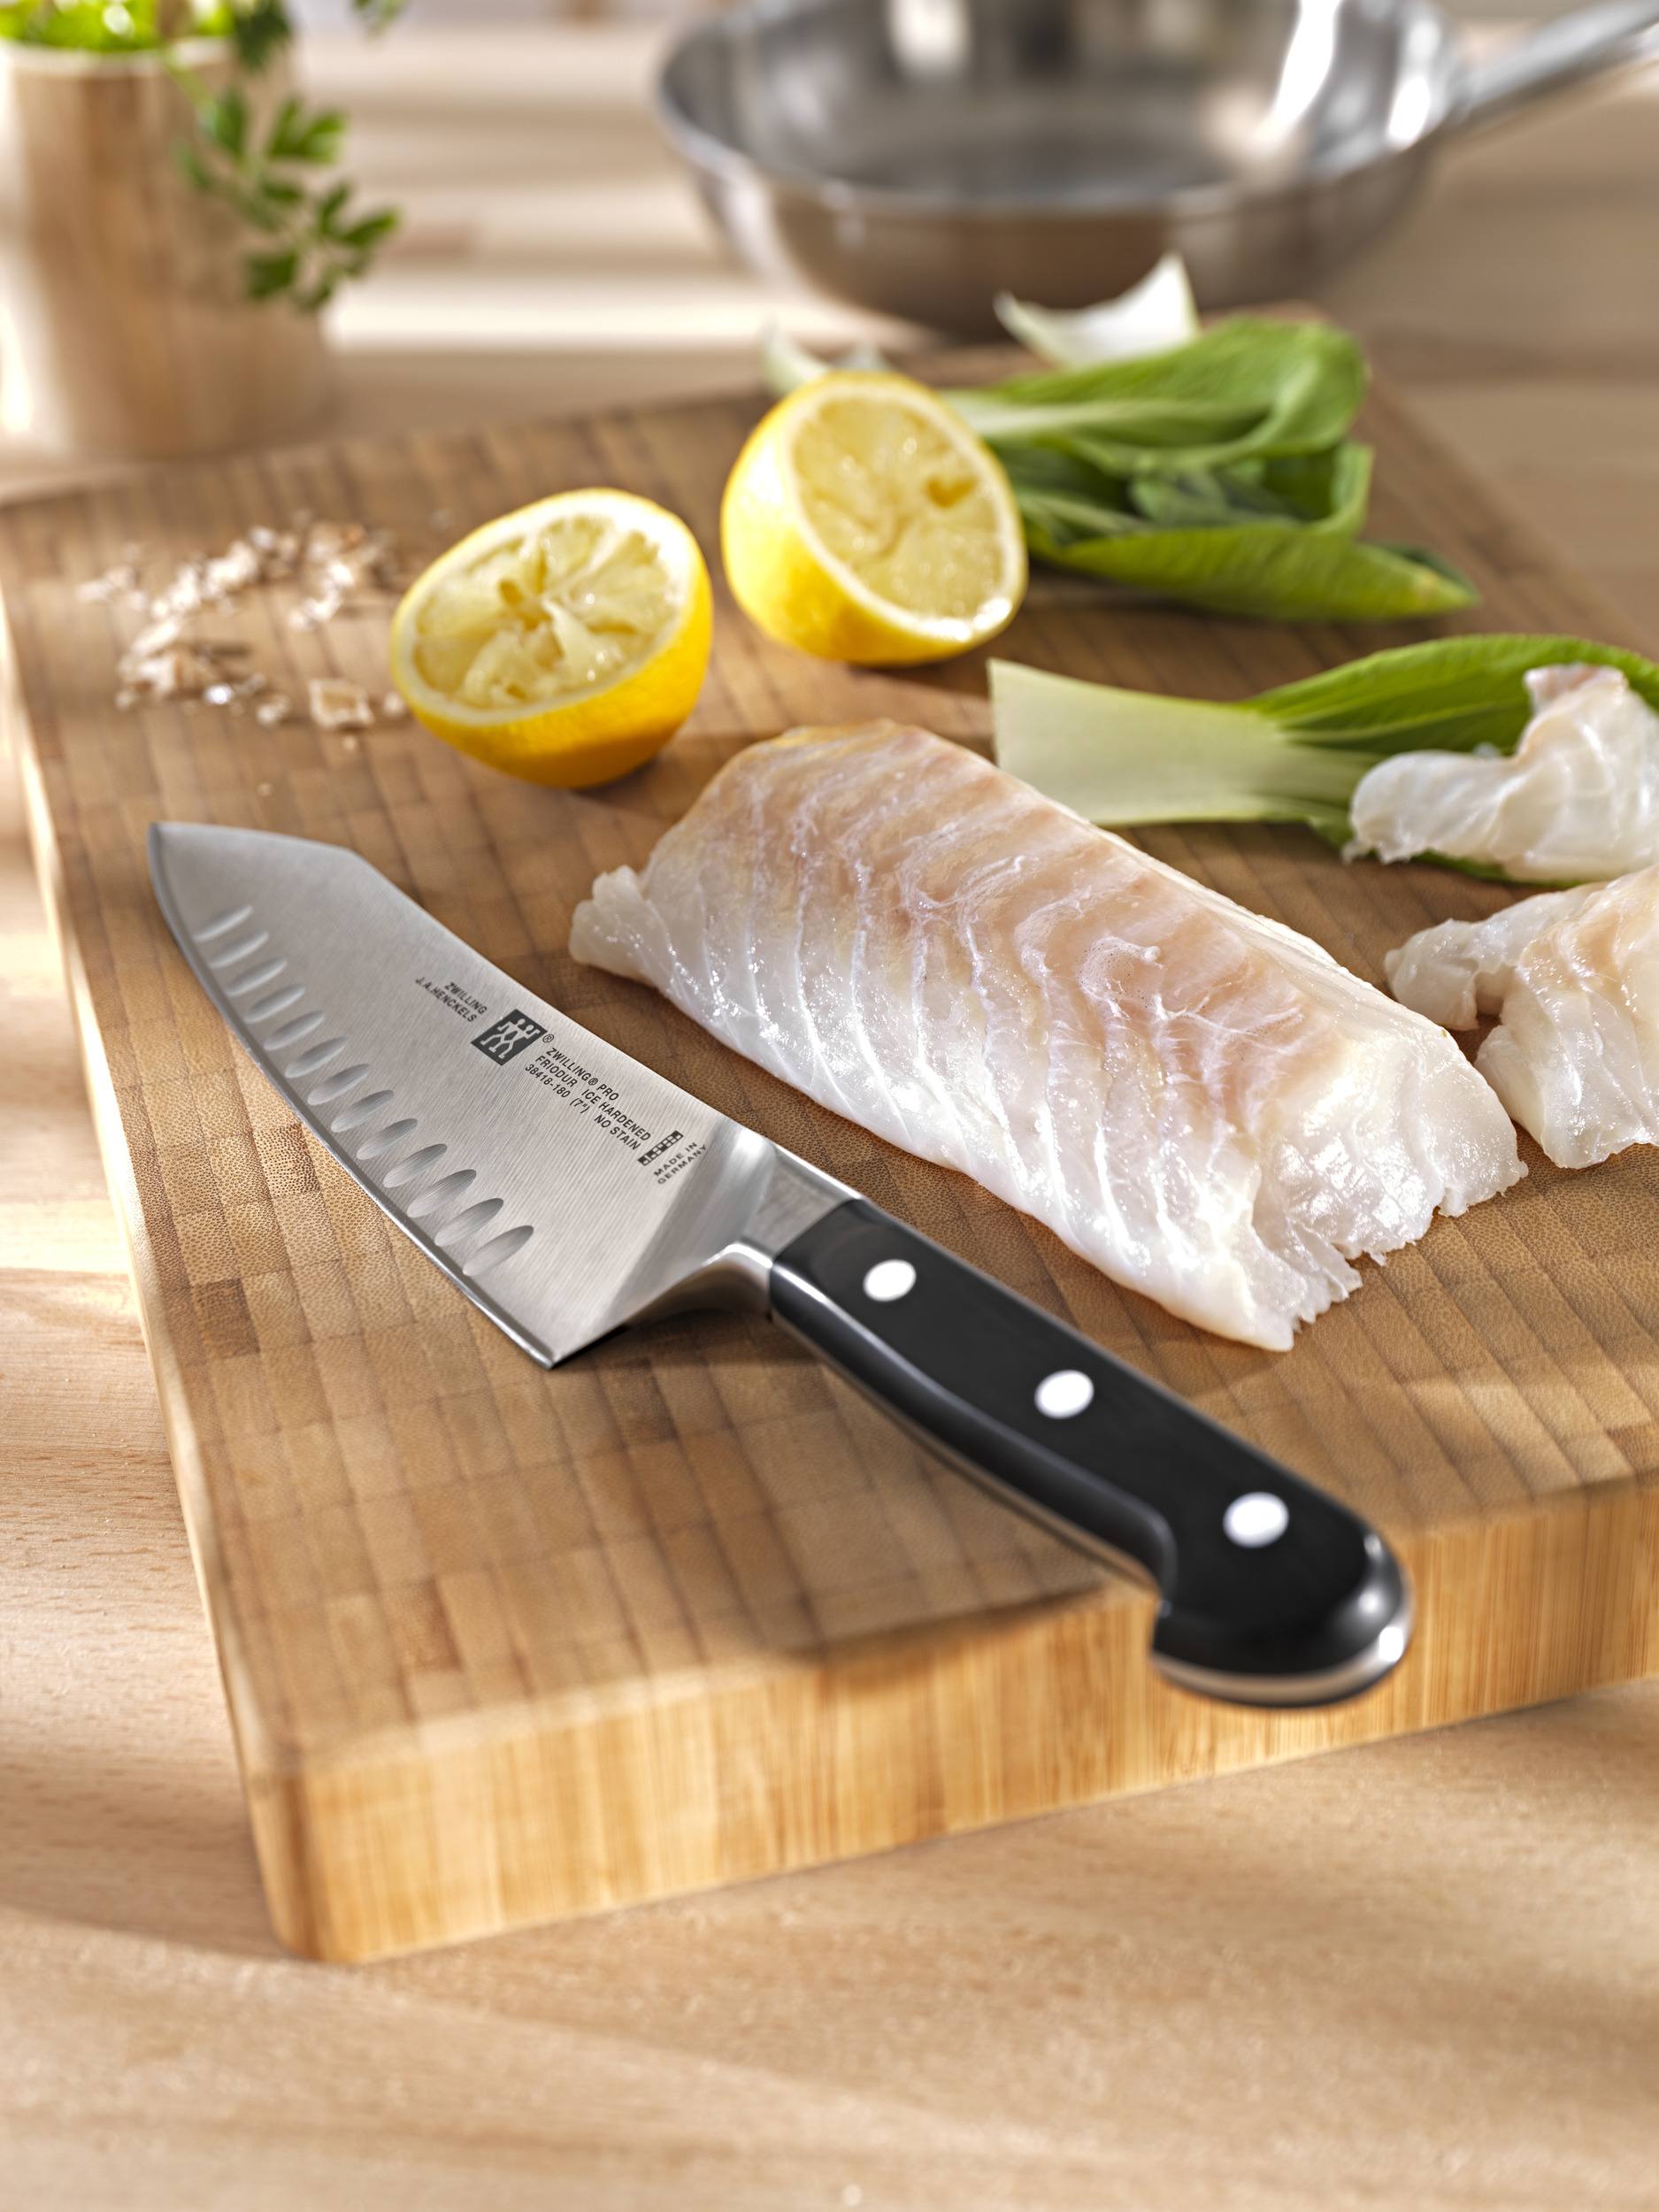 Buy ZWILLING Pro Chef's knife compact